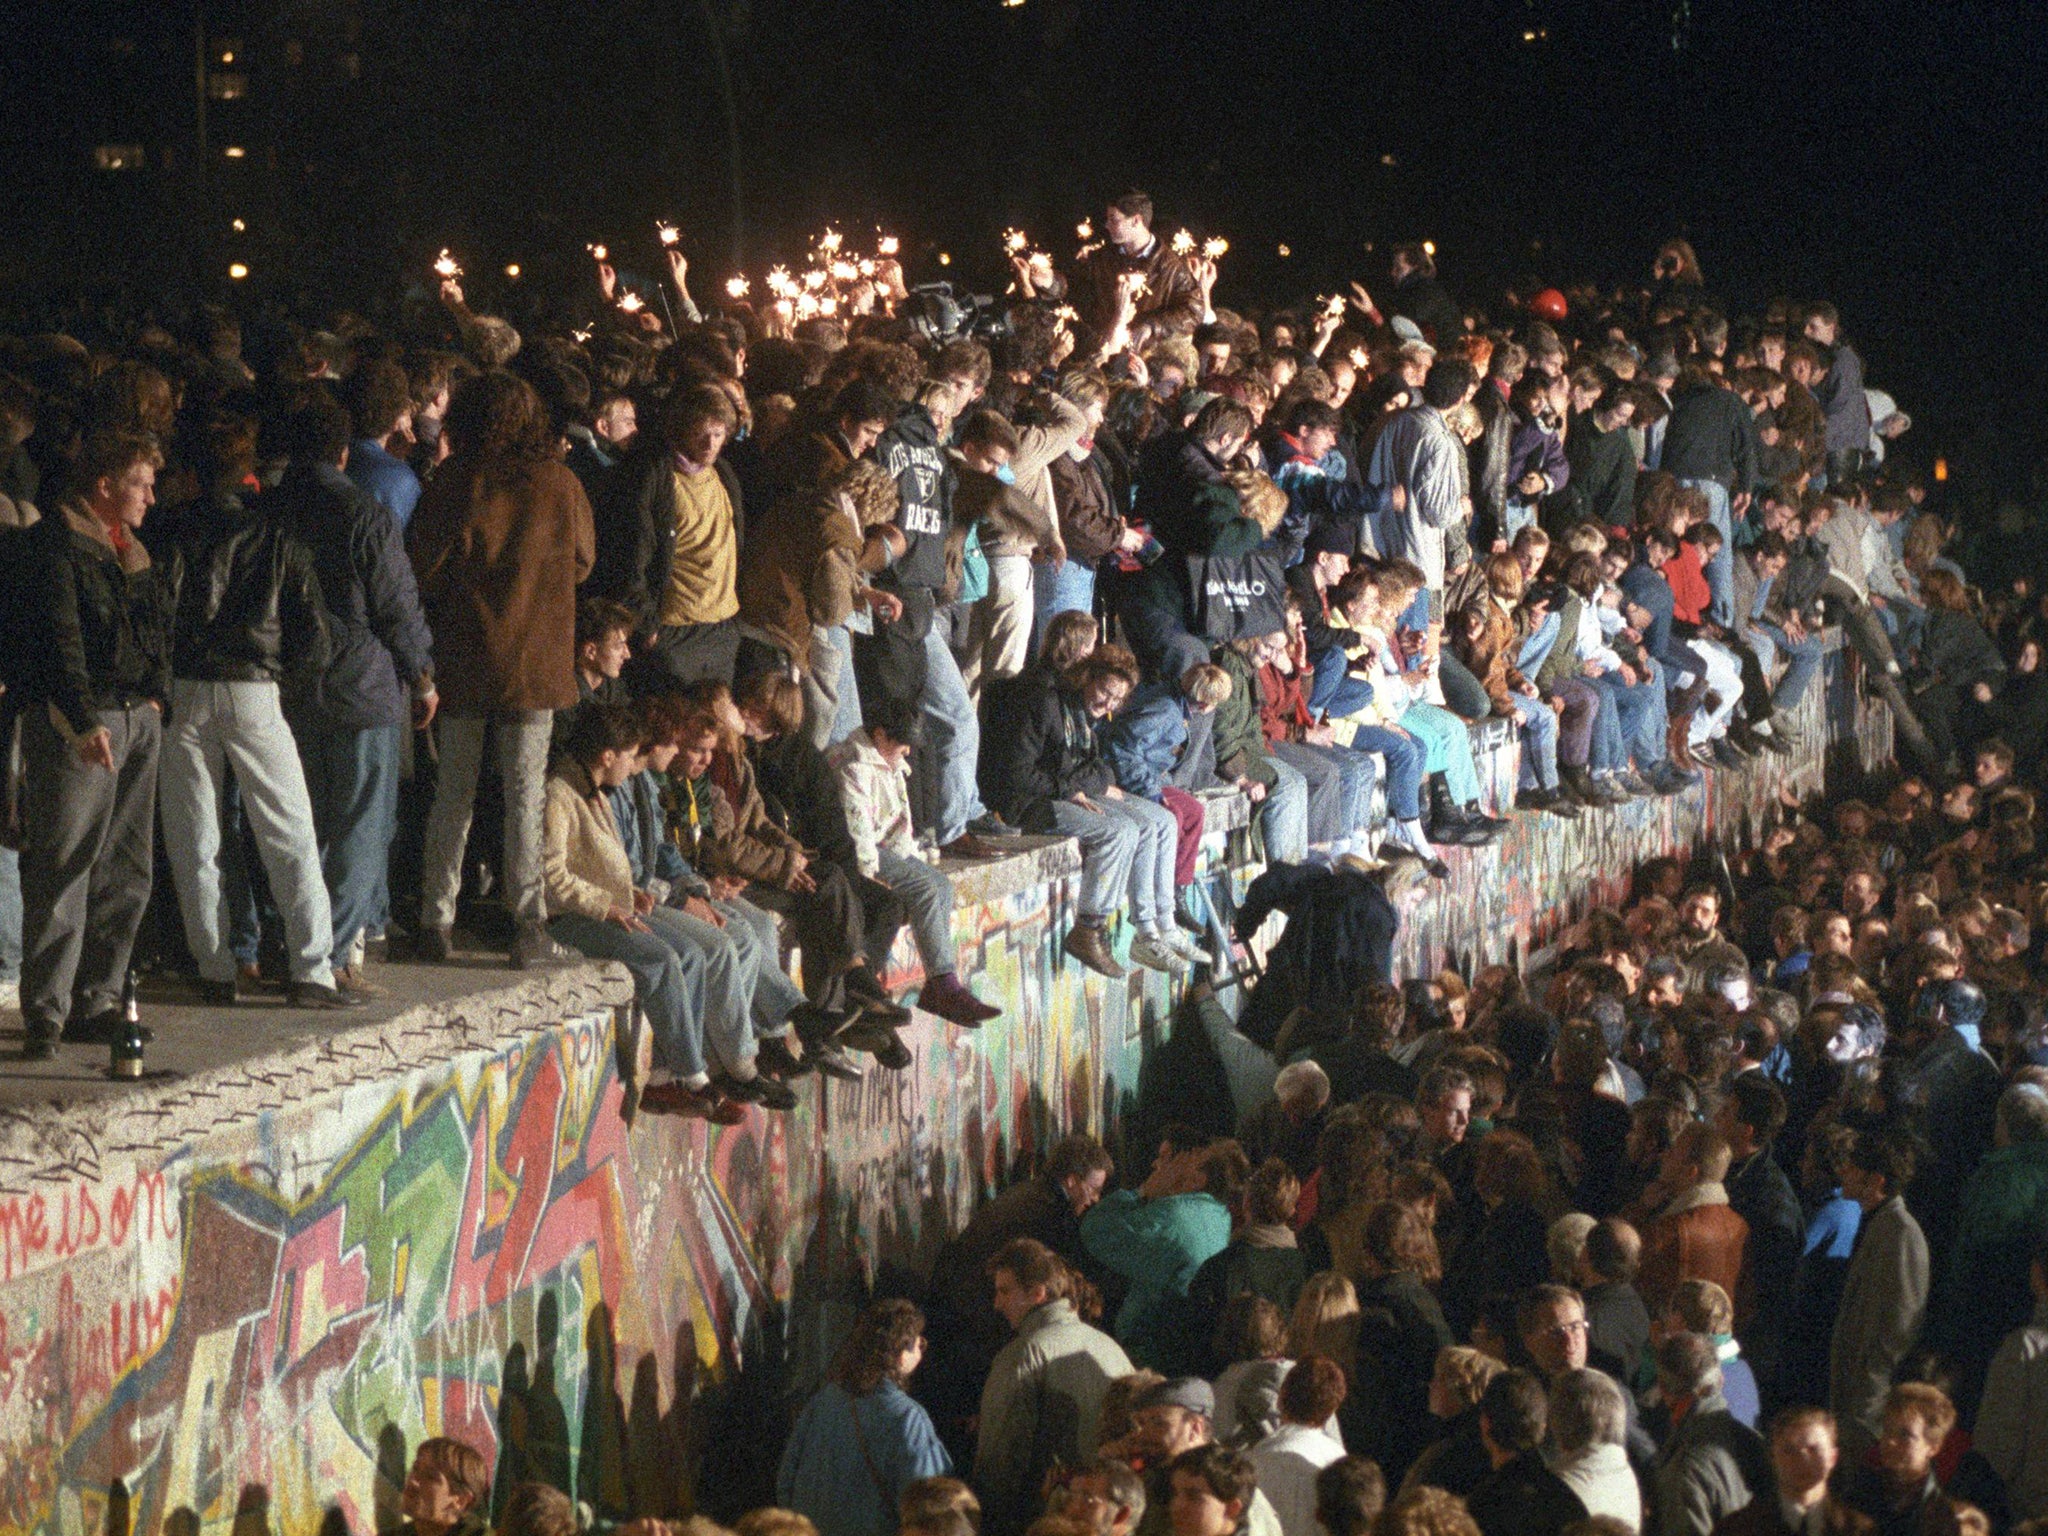 Between the fall of the Berlin Wall and the reunification of Germany a year later, Berliners lived in limbo - much like today